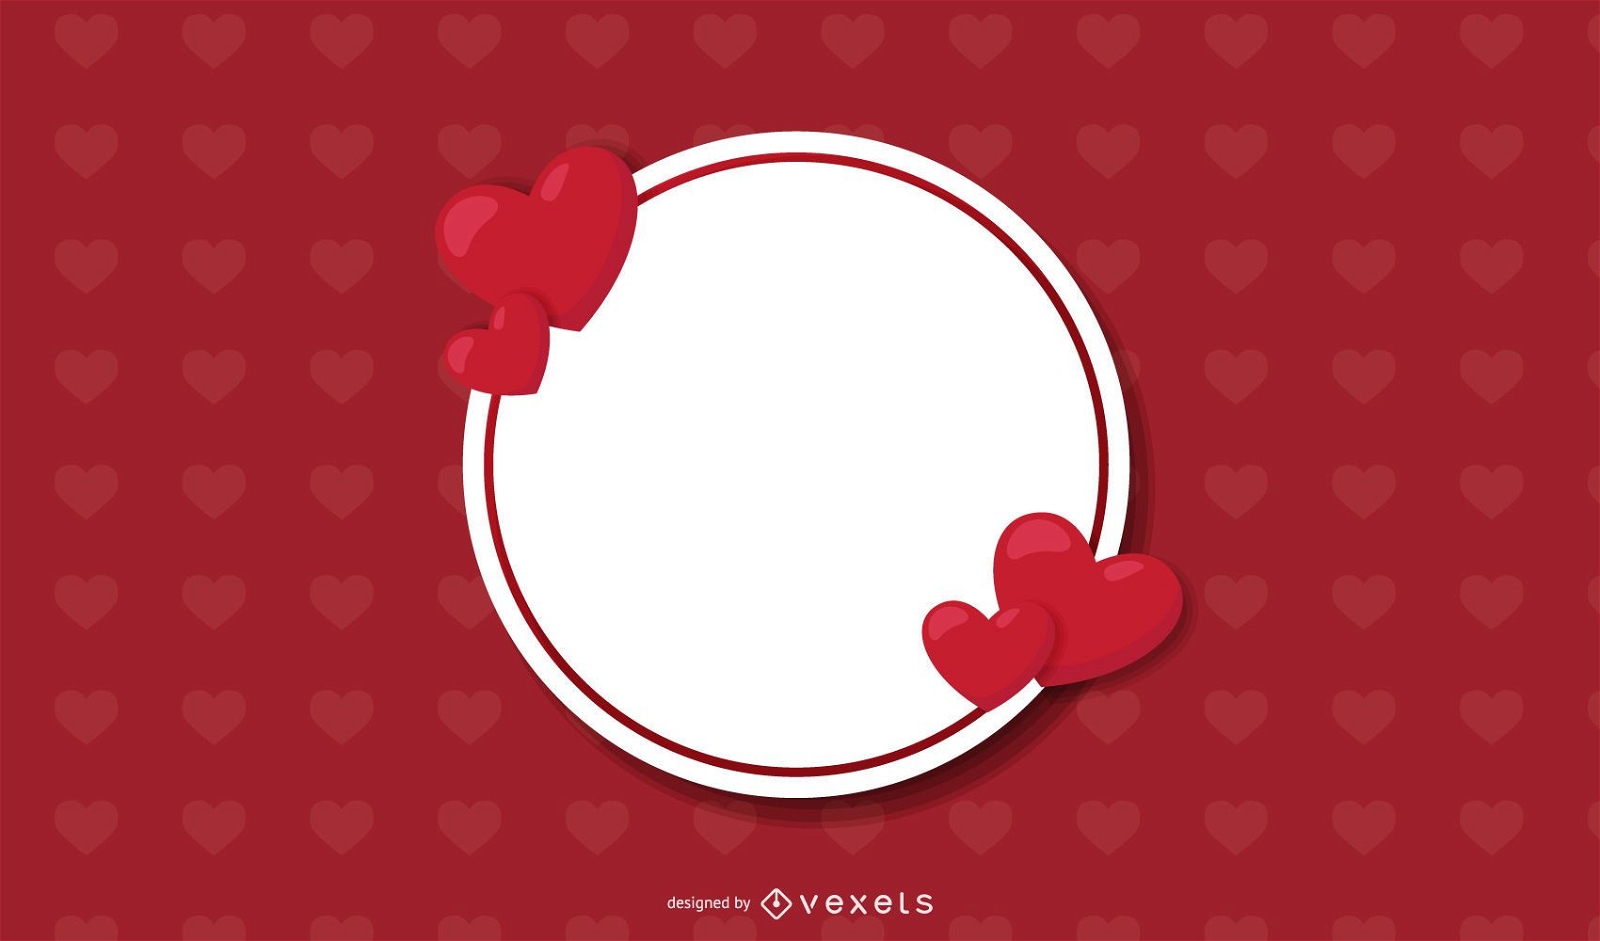 Circle Banner on Heart Pattern Background